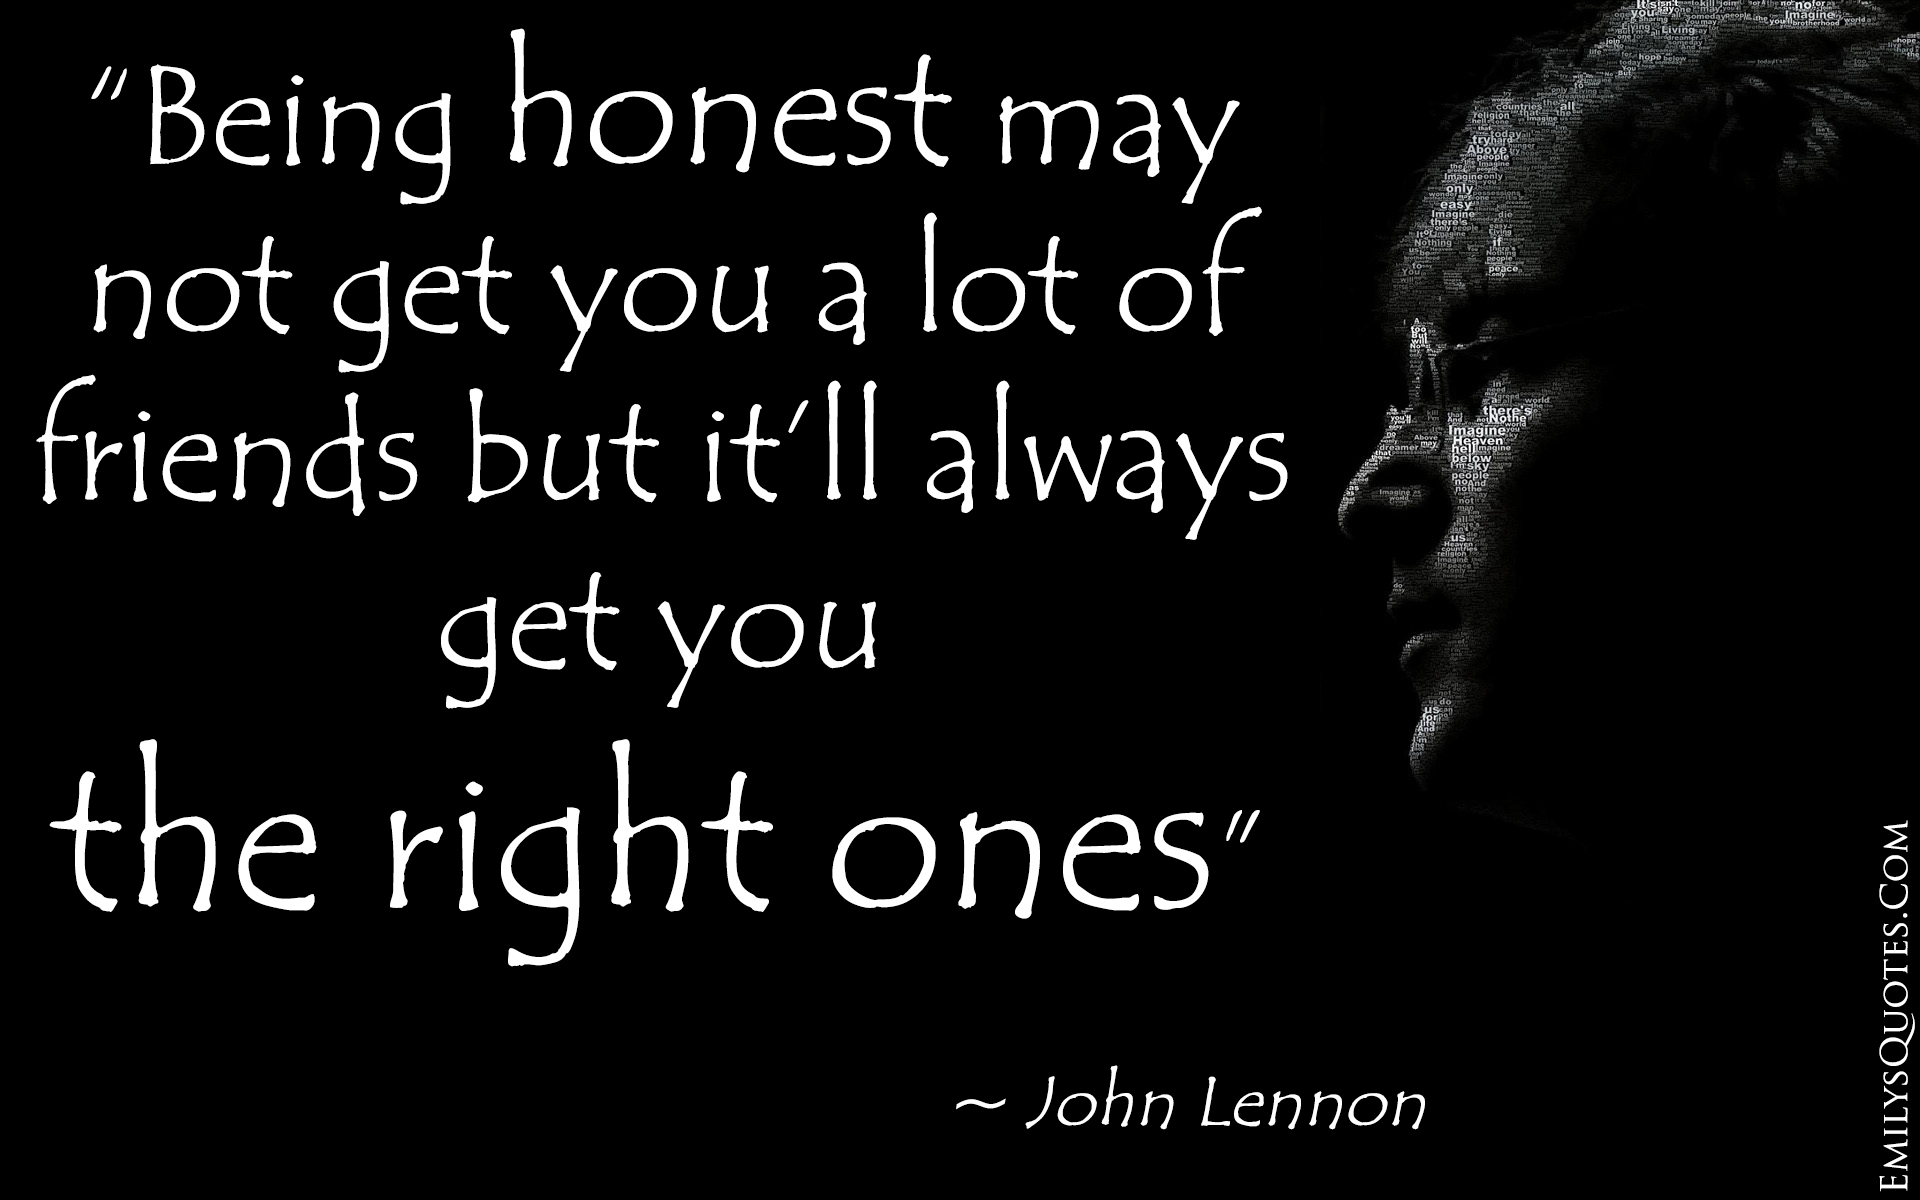 Being honest may not get you a lot of friends, but it'll always get you the right ones. John Lennon